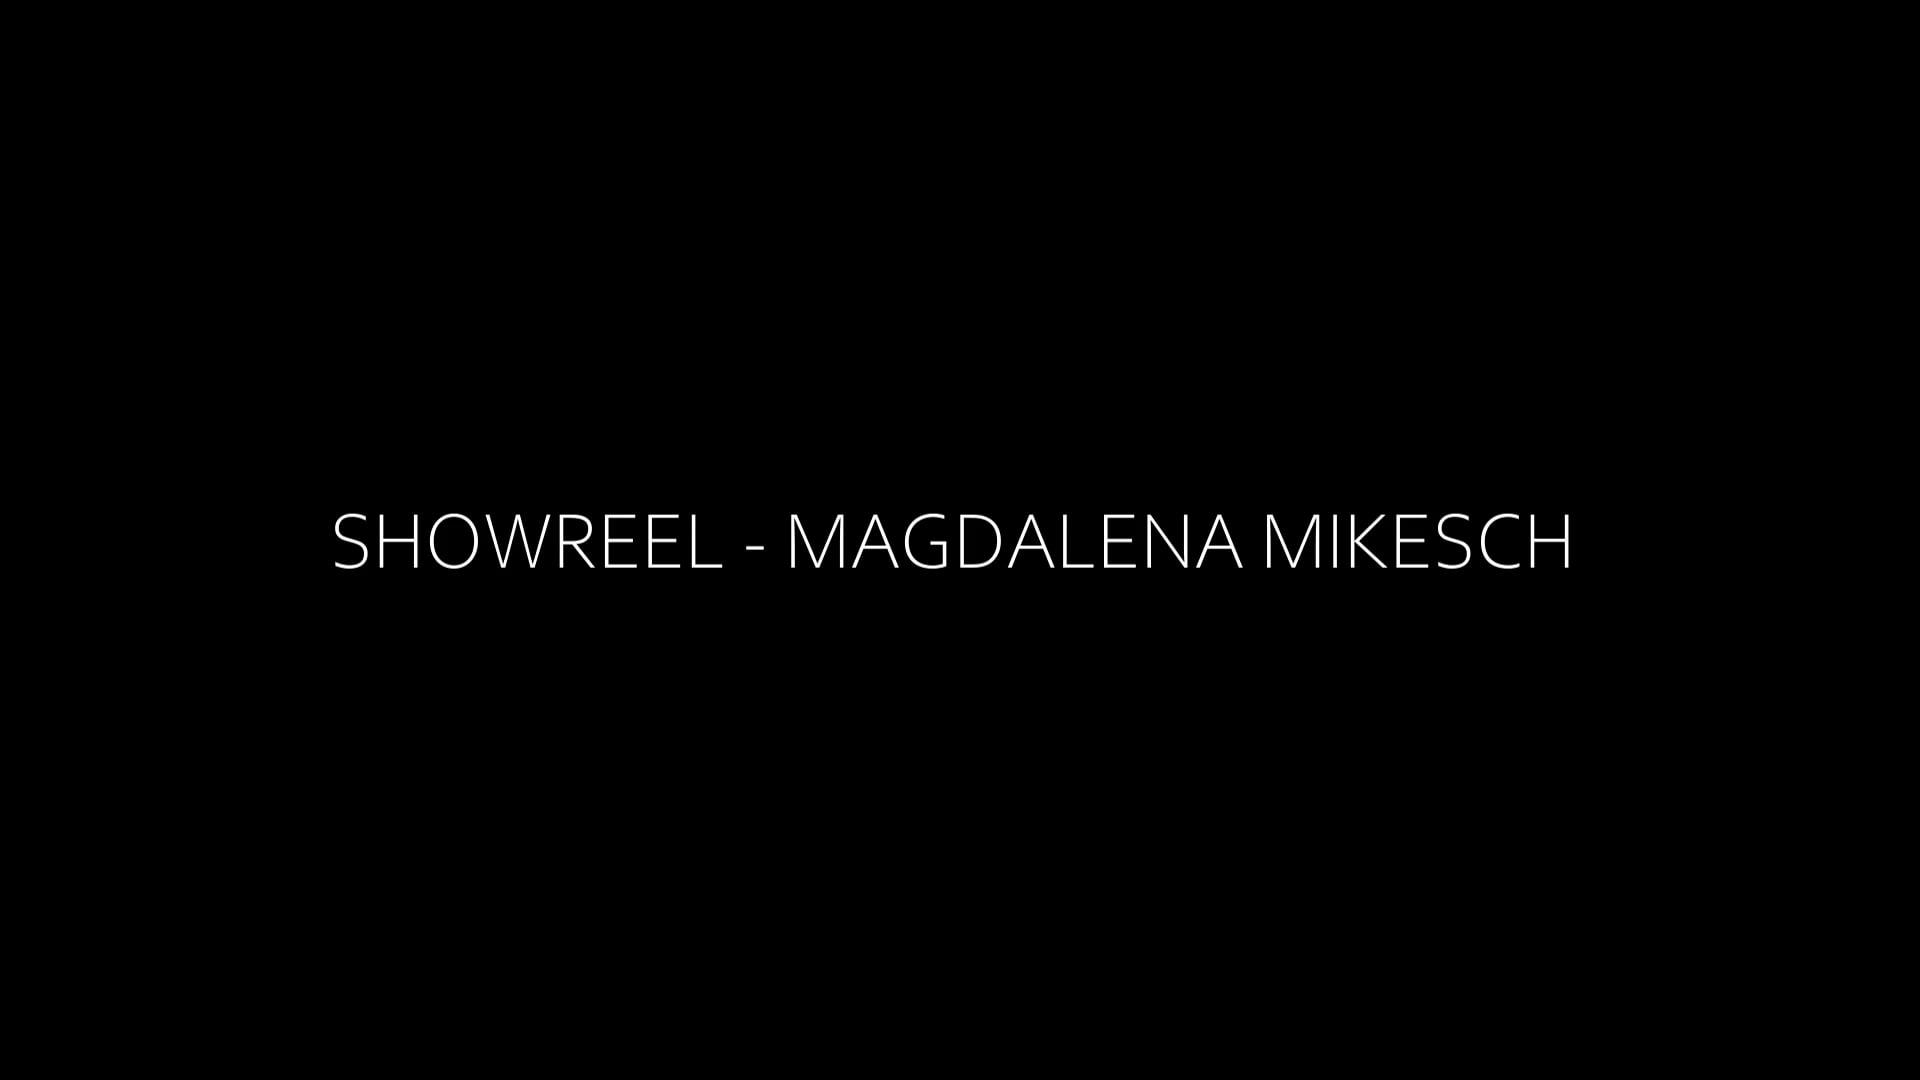 Showreel - Magdalena Mikesch